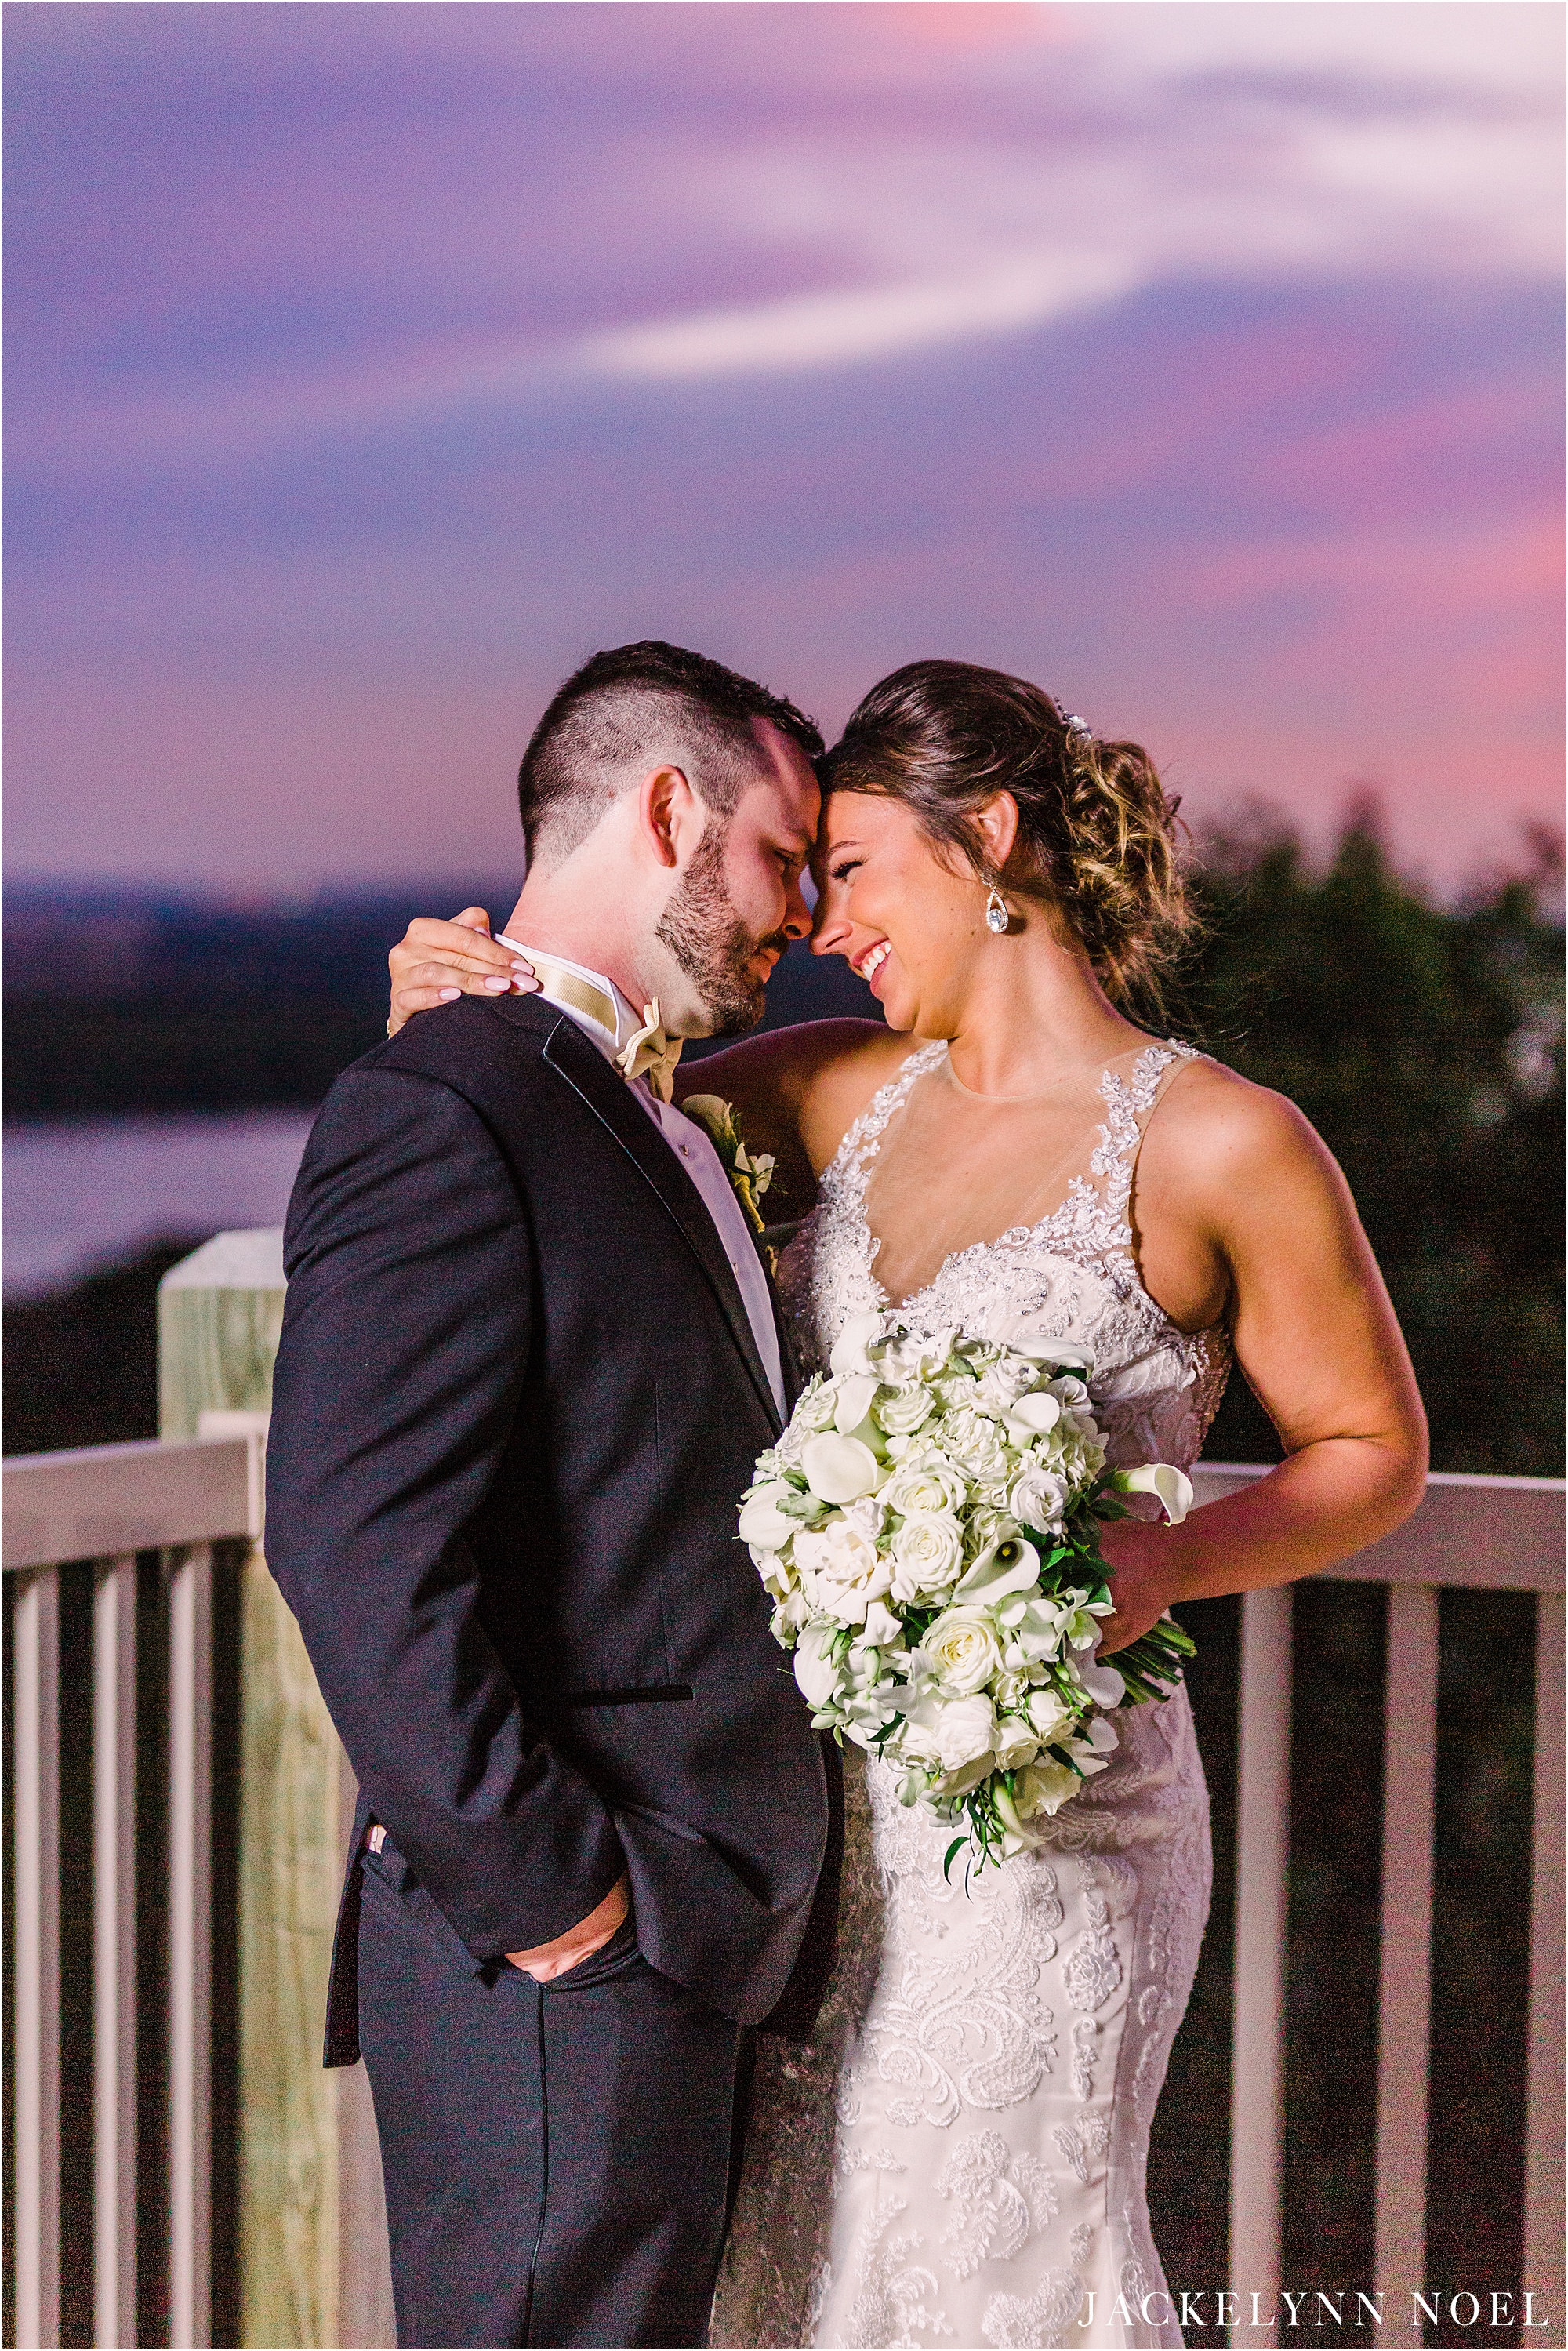 Courtney and Daniel's wedding at Aerie's Winery by Jackelynn Noel Photography